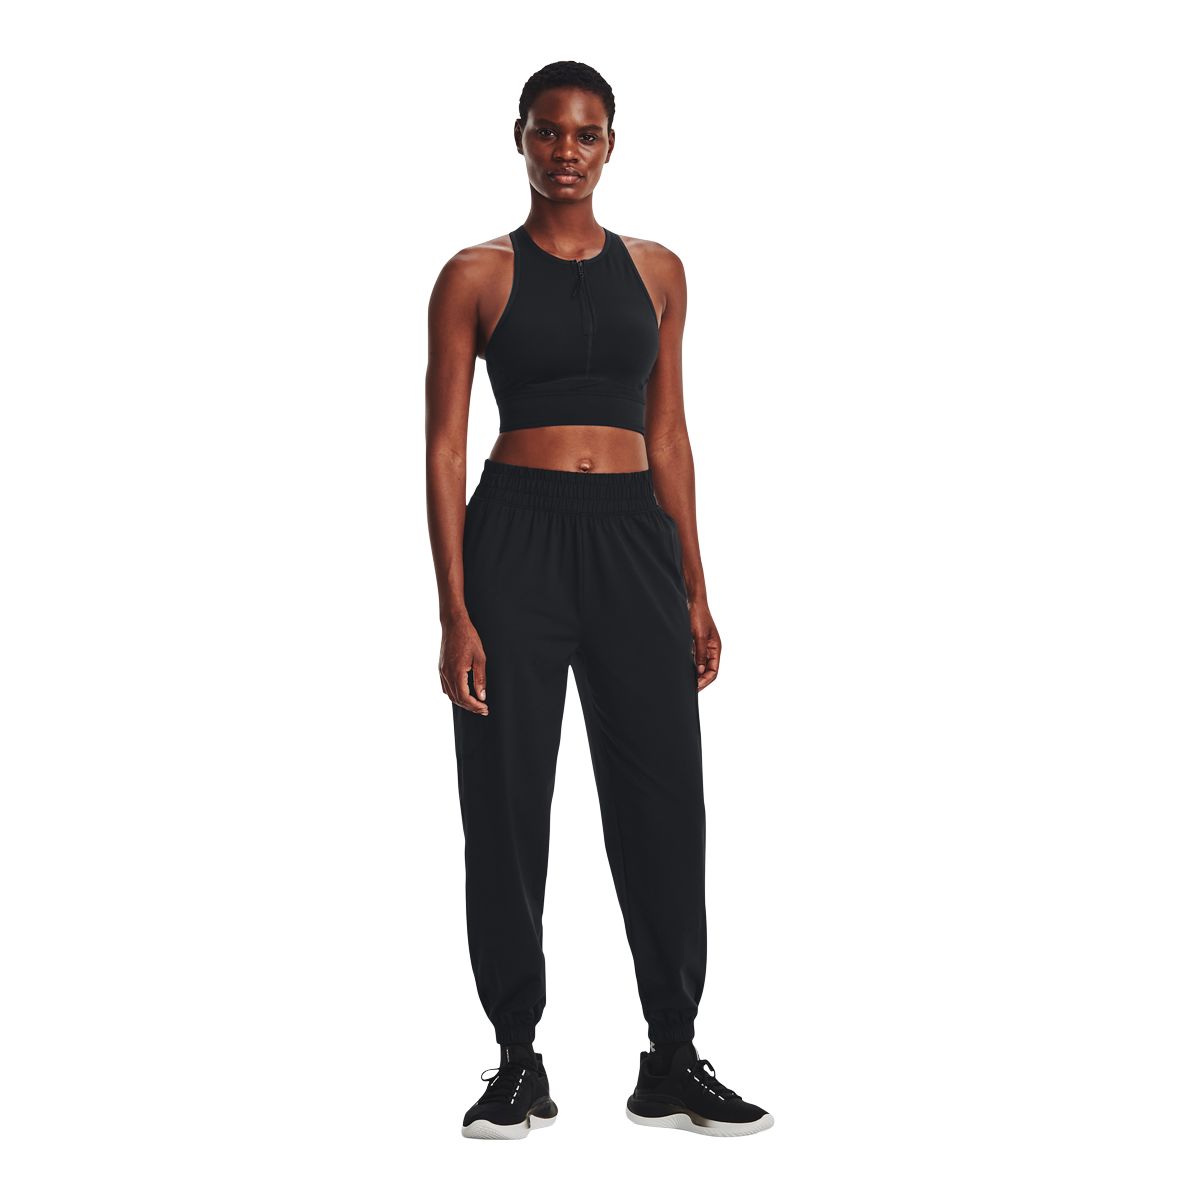 Womens UA Meridian Joggers - Relaxed Fit Workout Pants